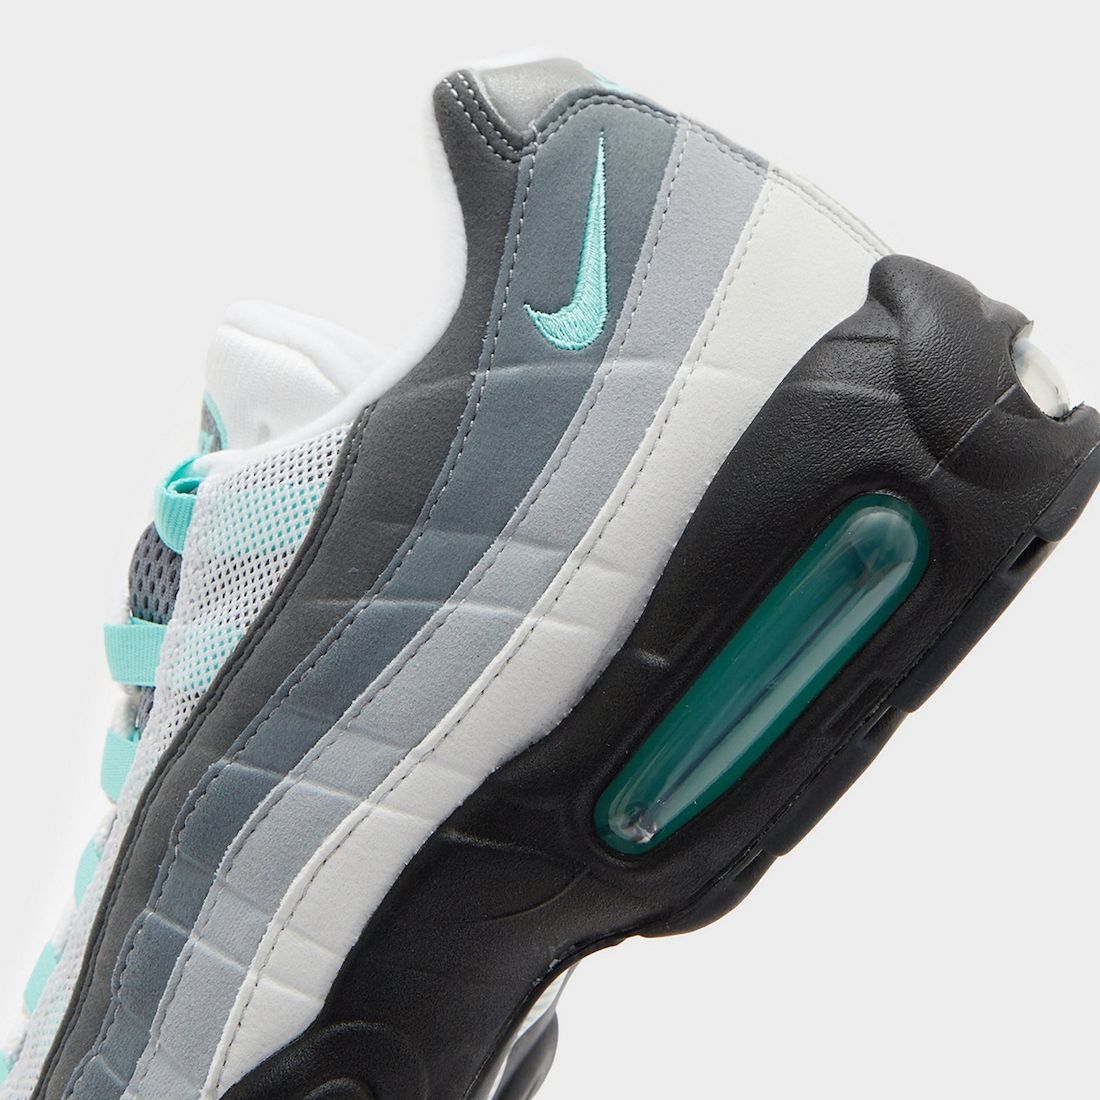 Nike Air Max 95 Hyper Turquoise FV4710 100 Release Date 5